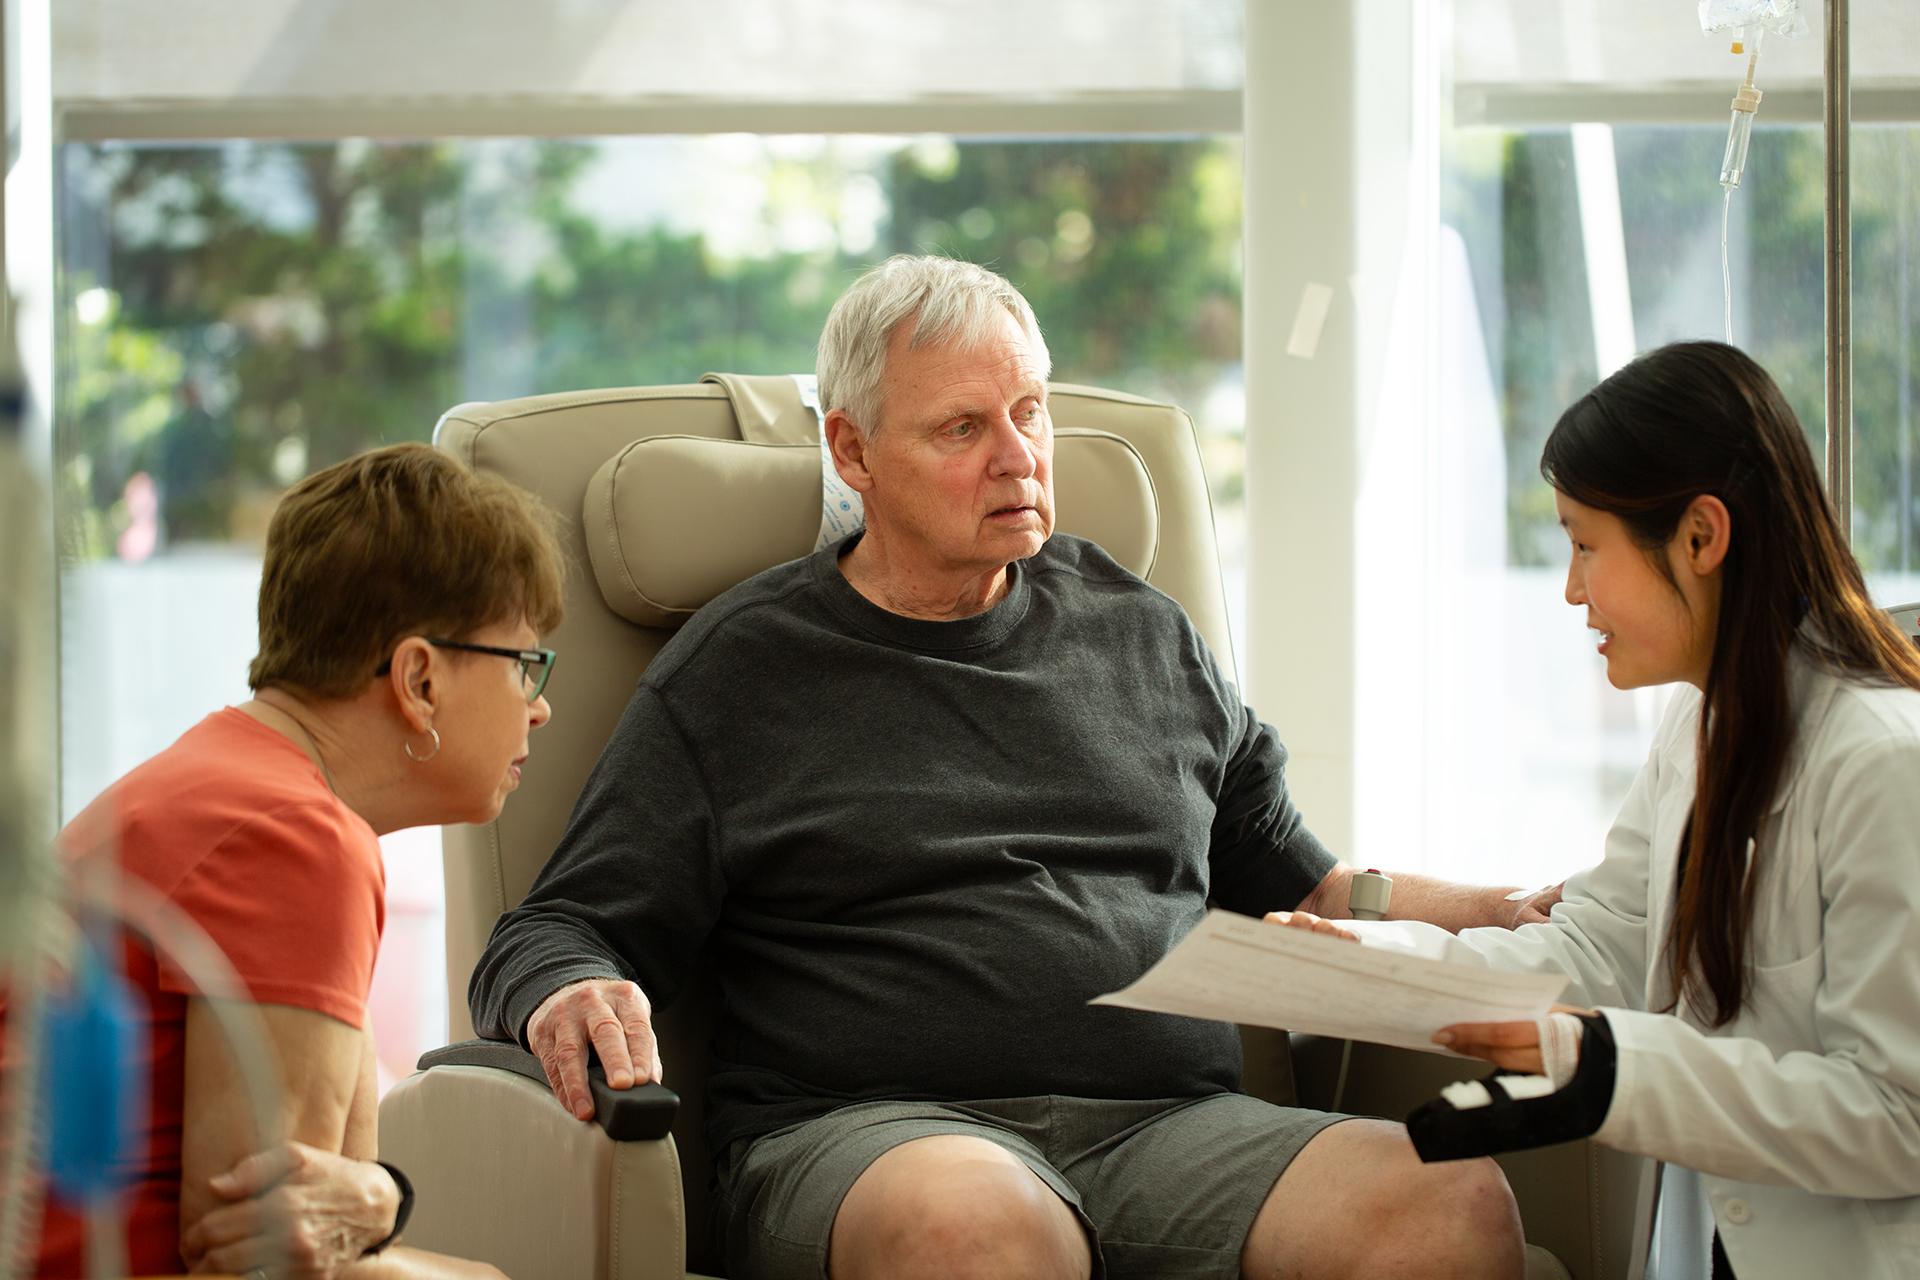 A health-system pharmacist showing a document to a patient and the patient's partner. The pharmacist is an Asian woman with long, dark hair, and the patient is an older caucasian man in a sweatshirt.